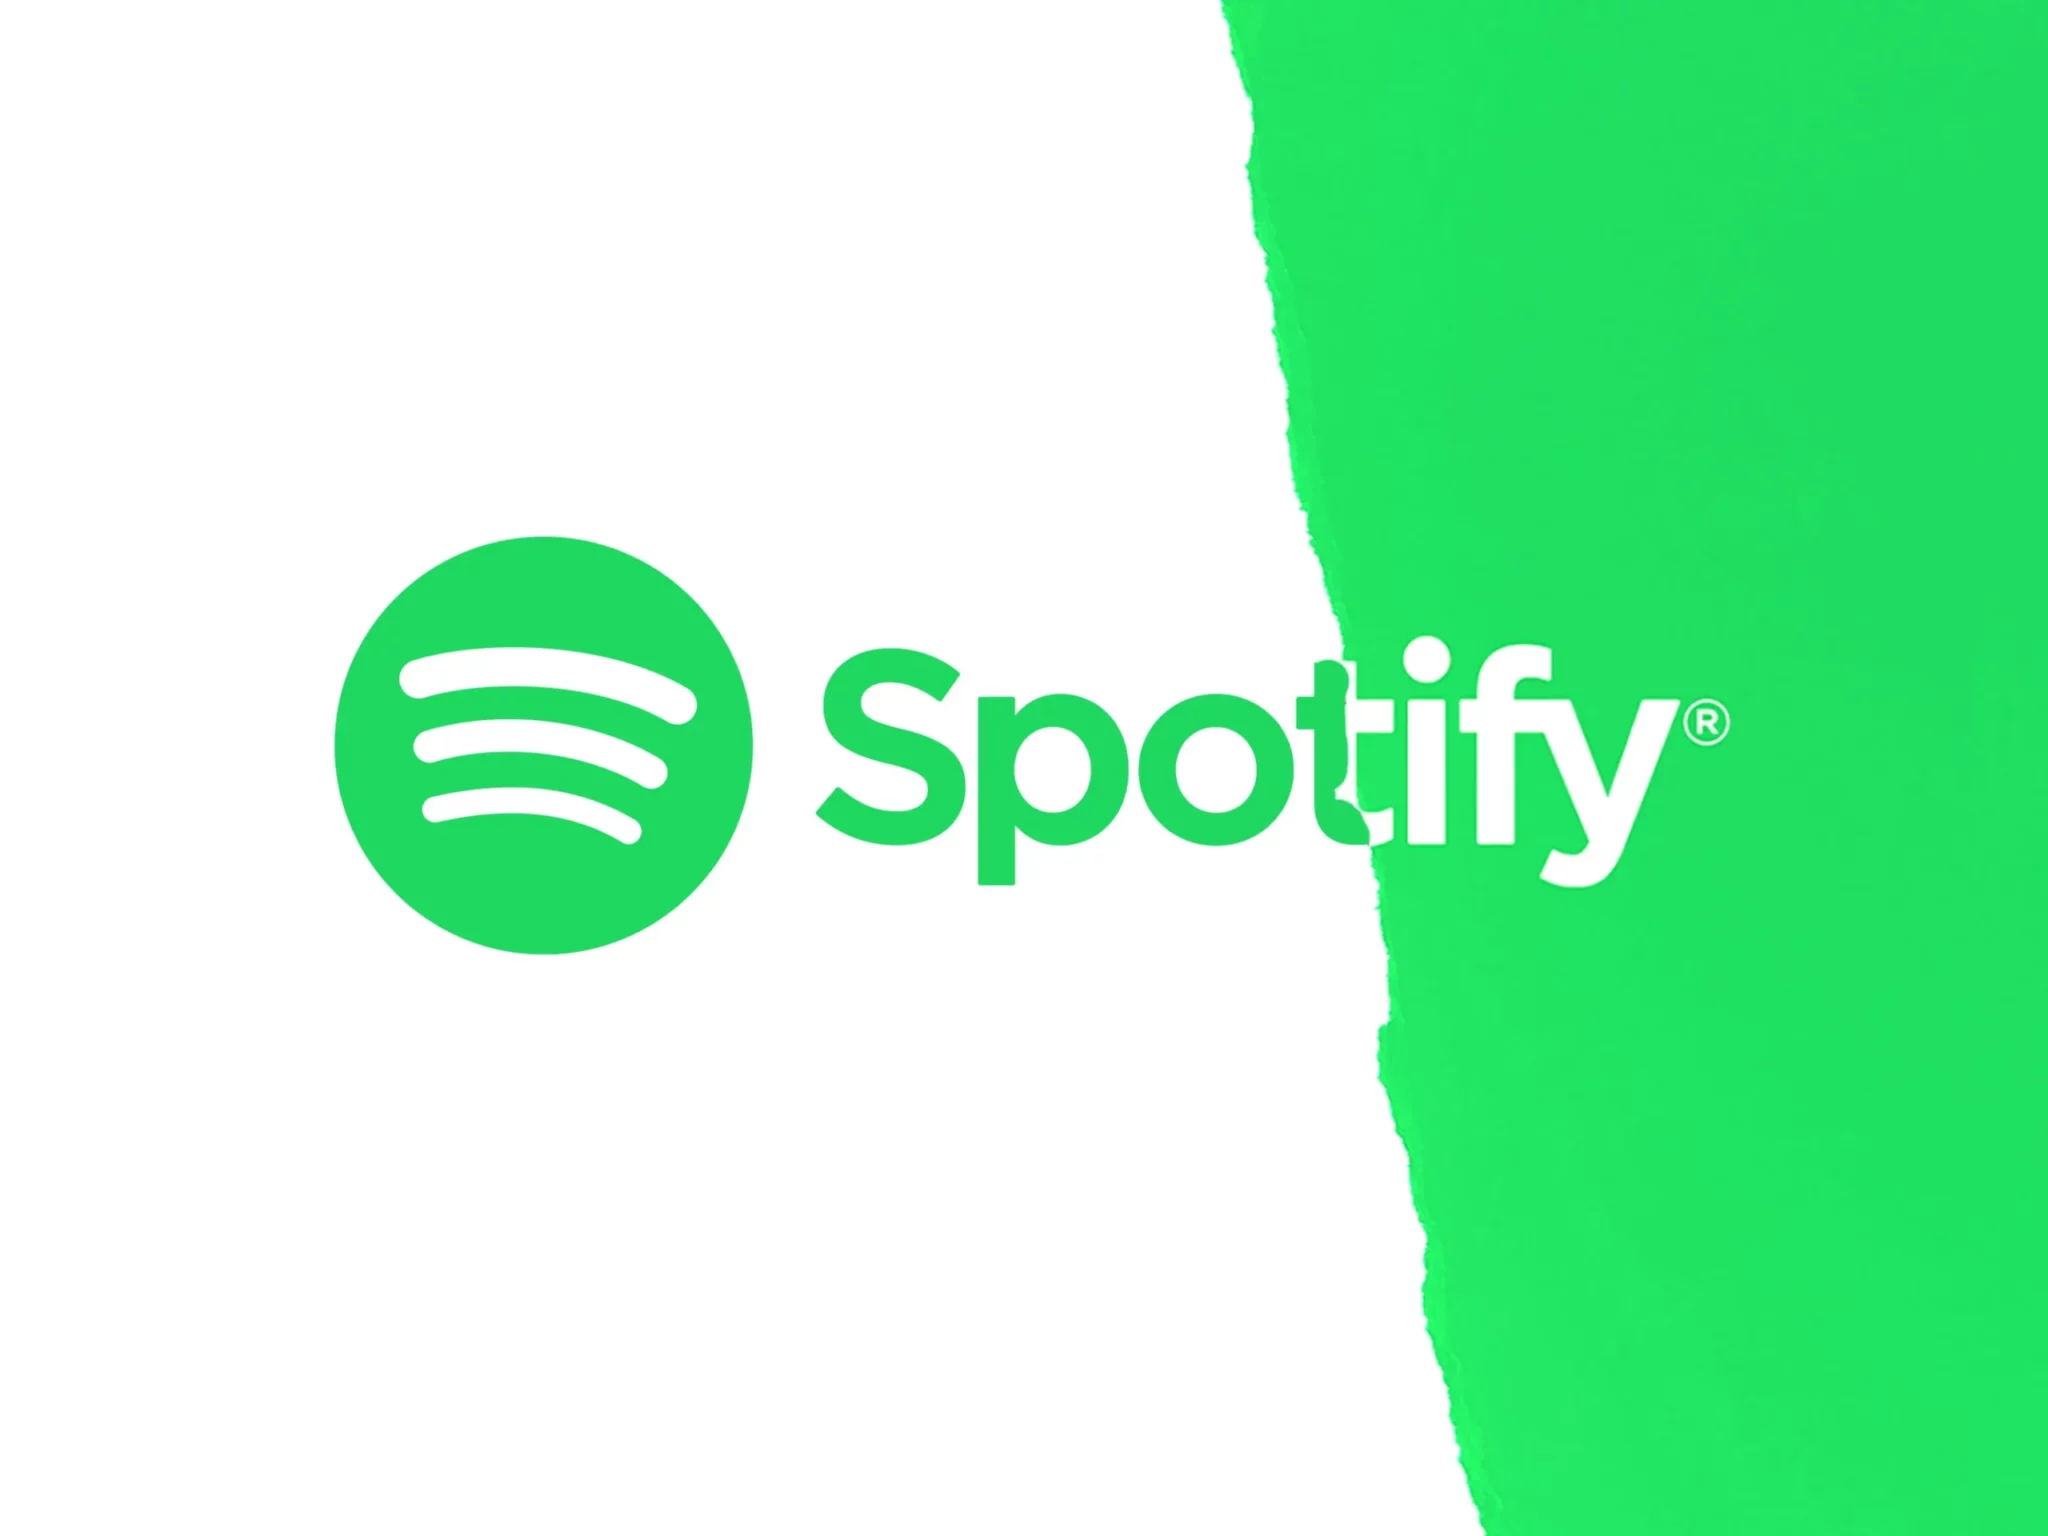 How to Break Out of the Spotify Feedback Loop by Finding New Music